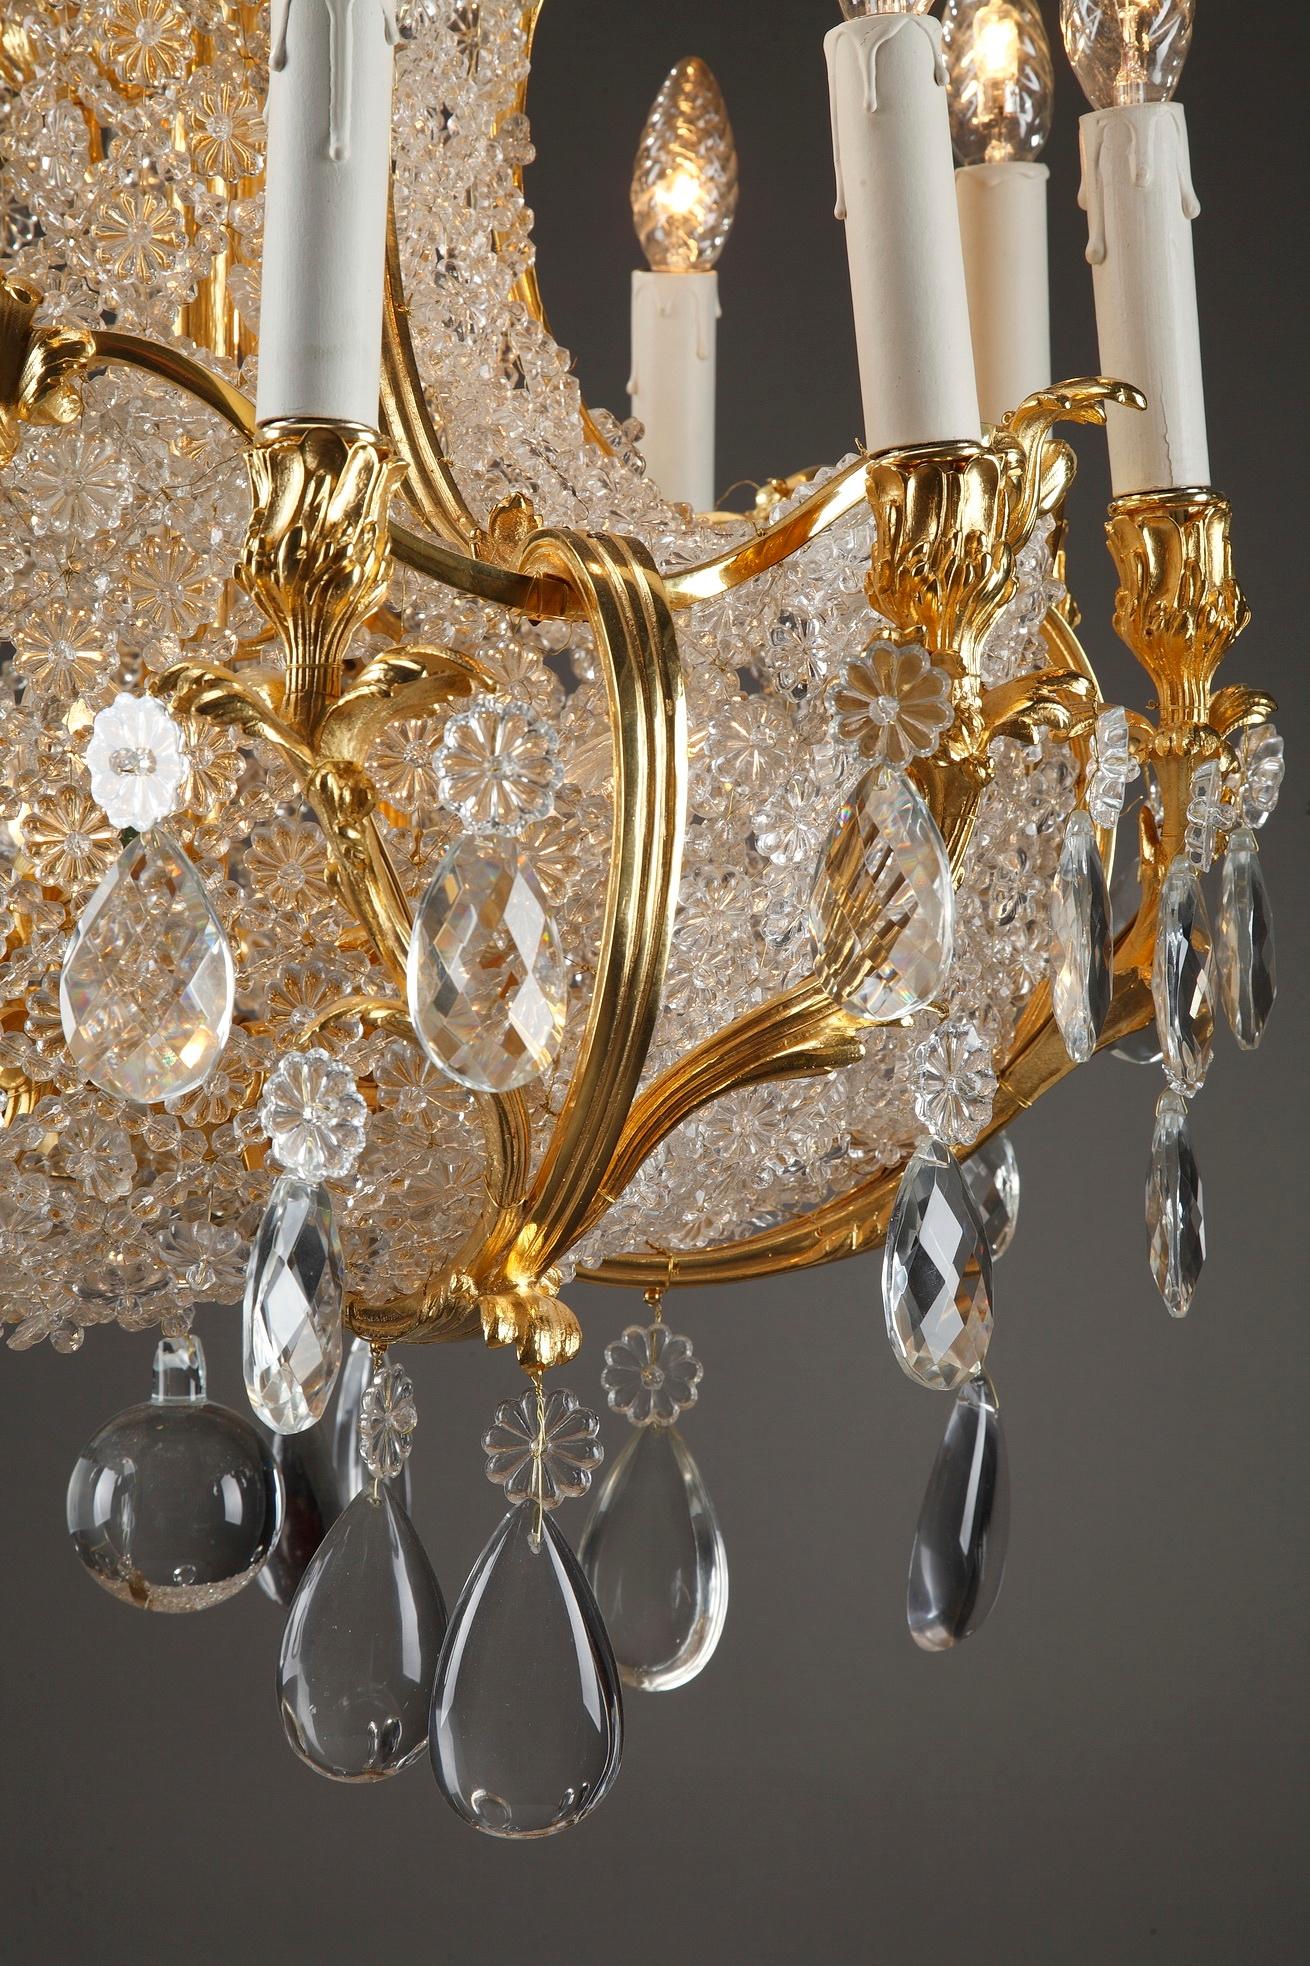 19th Century 10-Light Ormolu and Crystal Basket-Shaped Chandelier For Sale 1